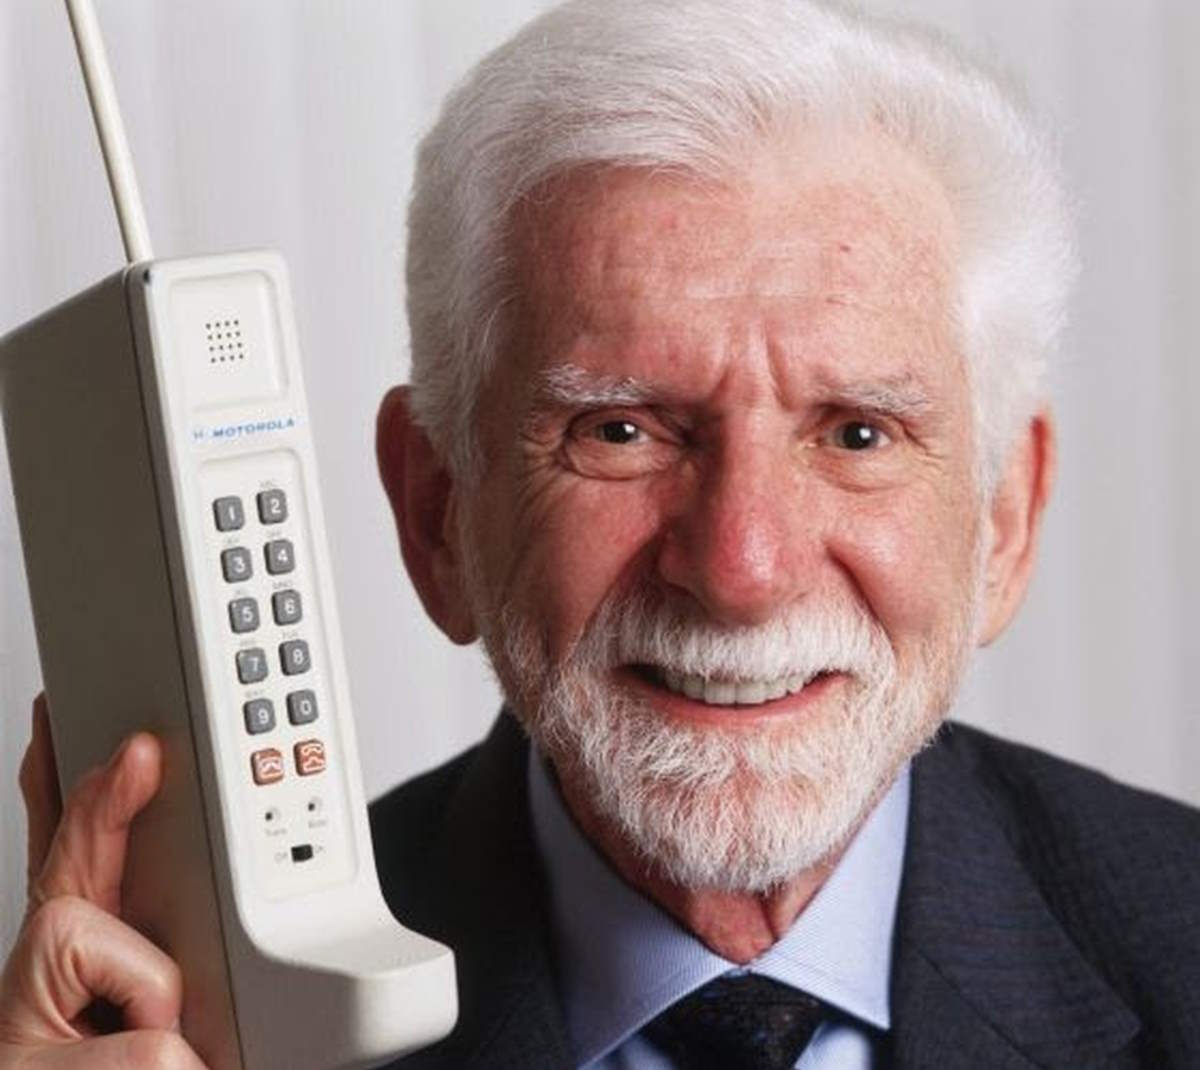 The first cell phone call was made by Martin Cooper in 1973